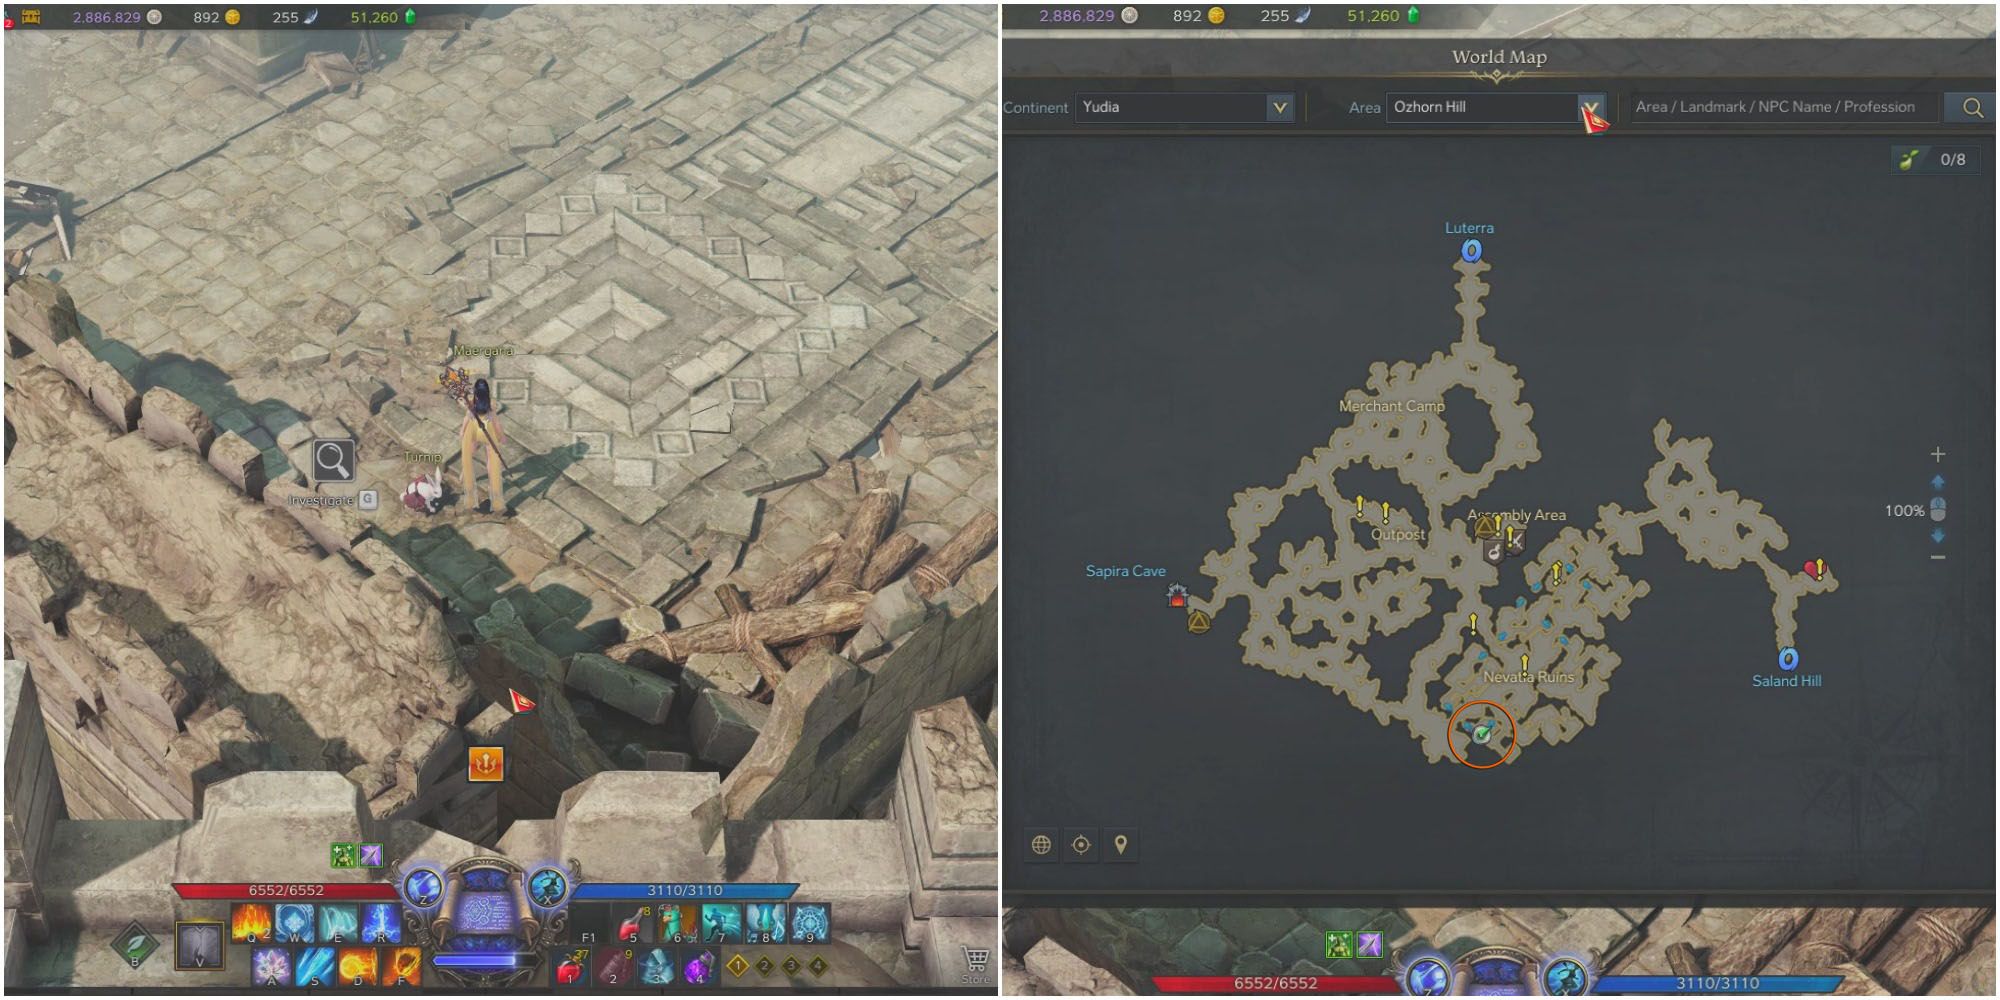 Split image of player standing in ruins by investigate icon, and a map of Ozhorn Hill